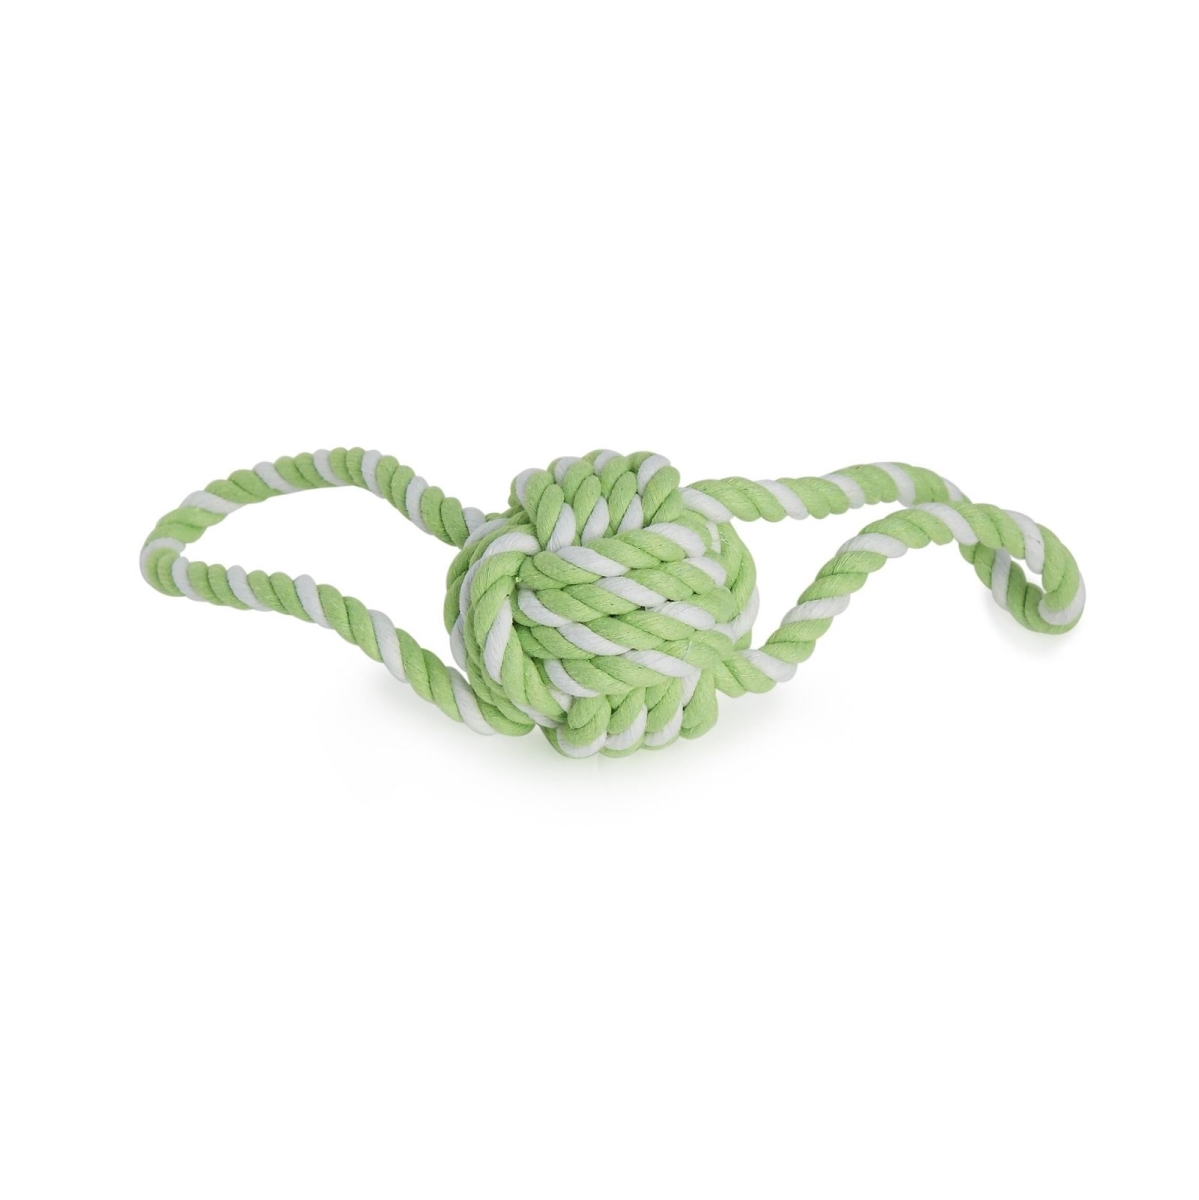 Replacement Ball Knot For Tugger, Small